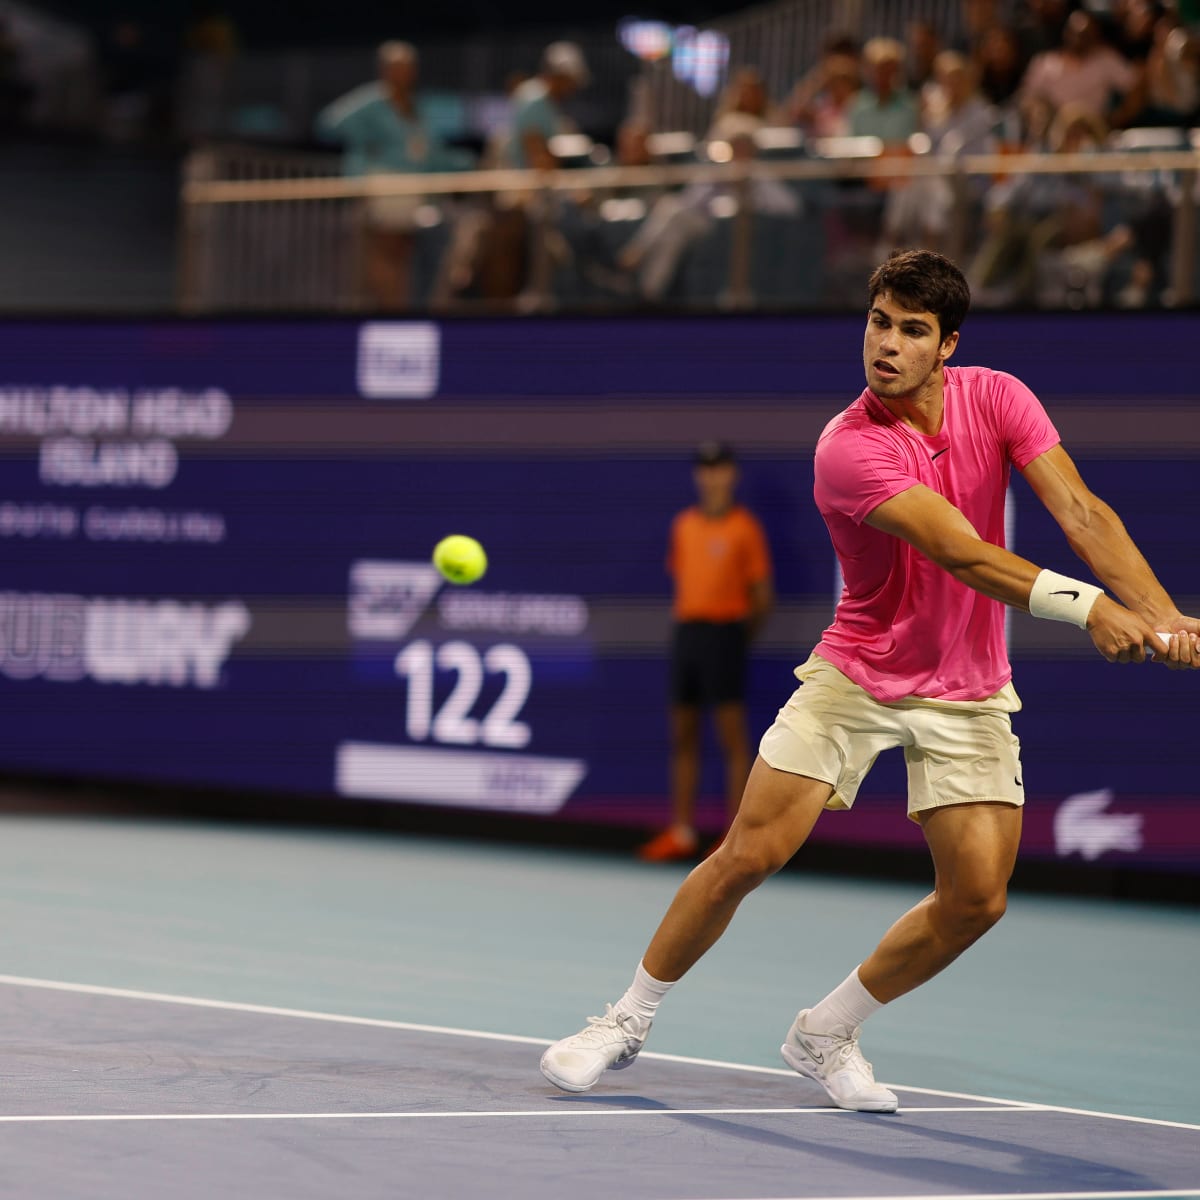 Alcaraz vs Sinner Semifinal Free Live Stream Miami Open, Channel - How to Watch and Stream Major League and College Sports